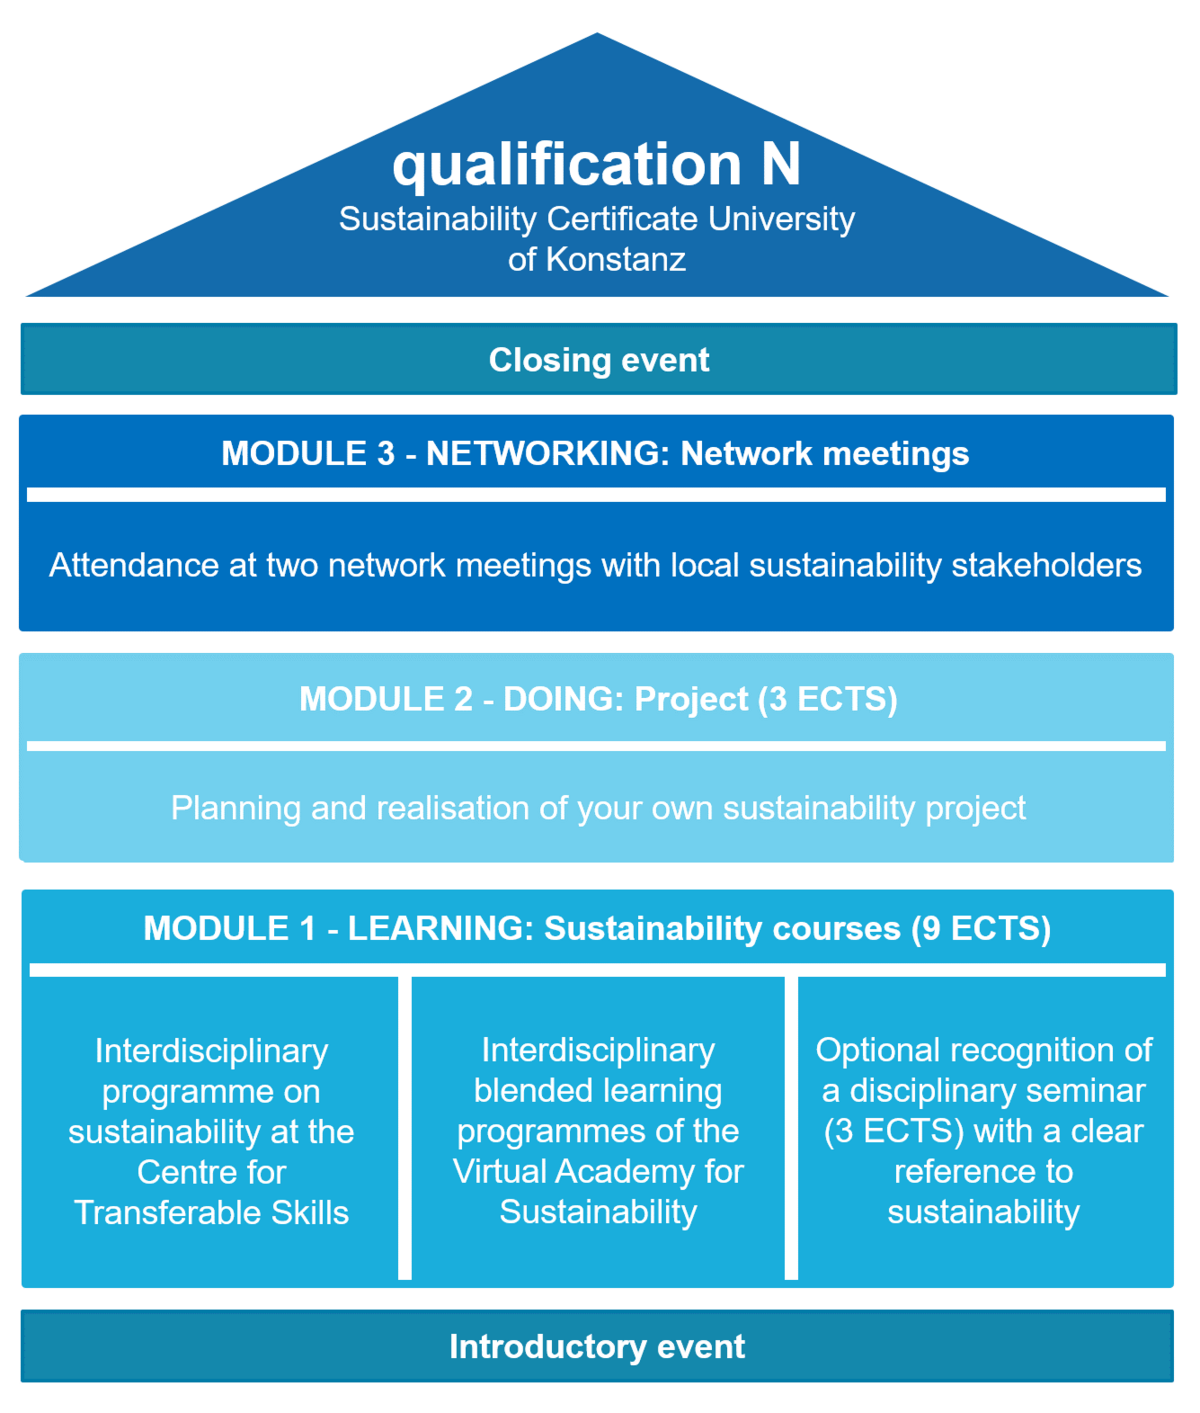 Overview of the modular structure of the qualification N